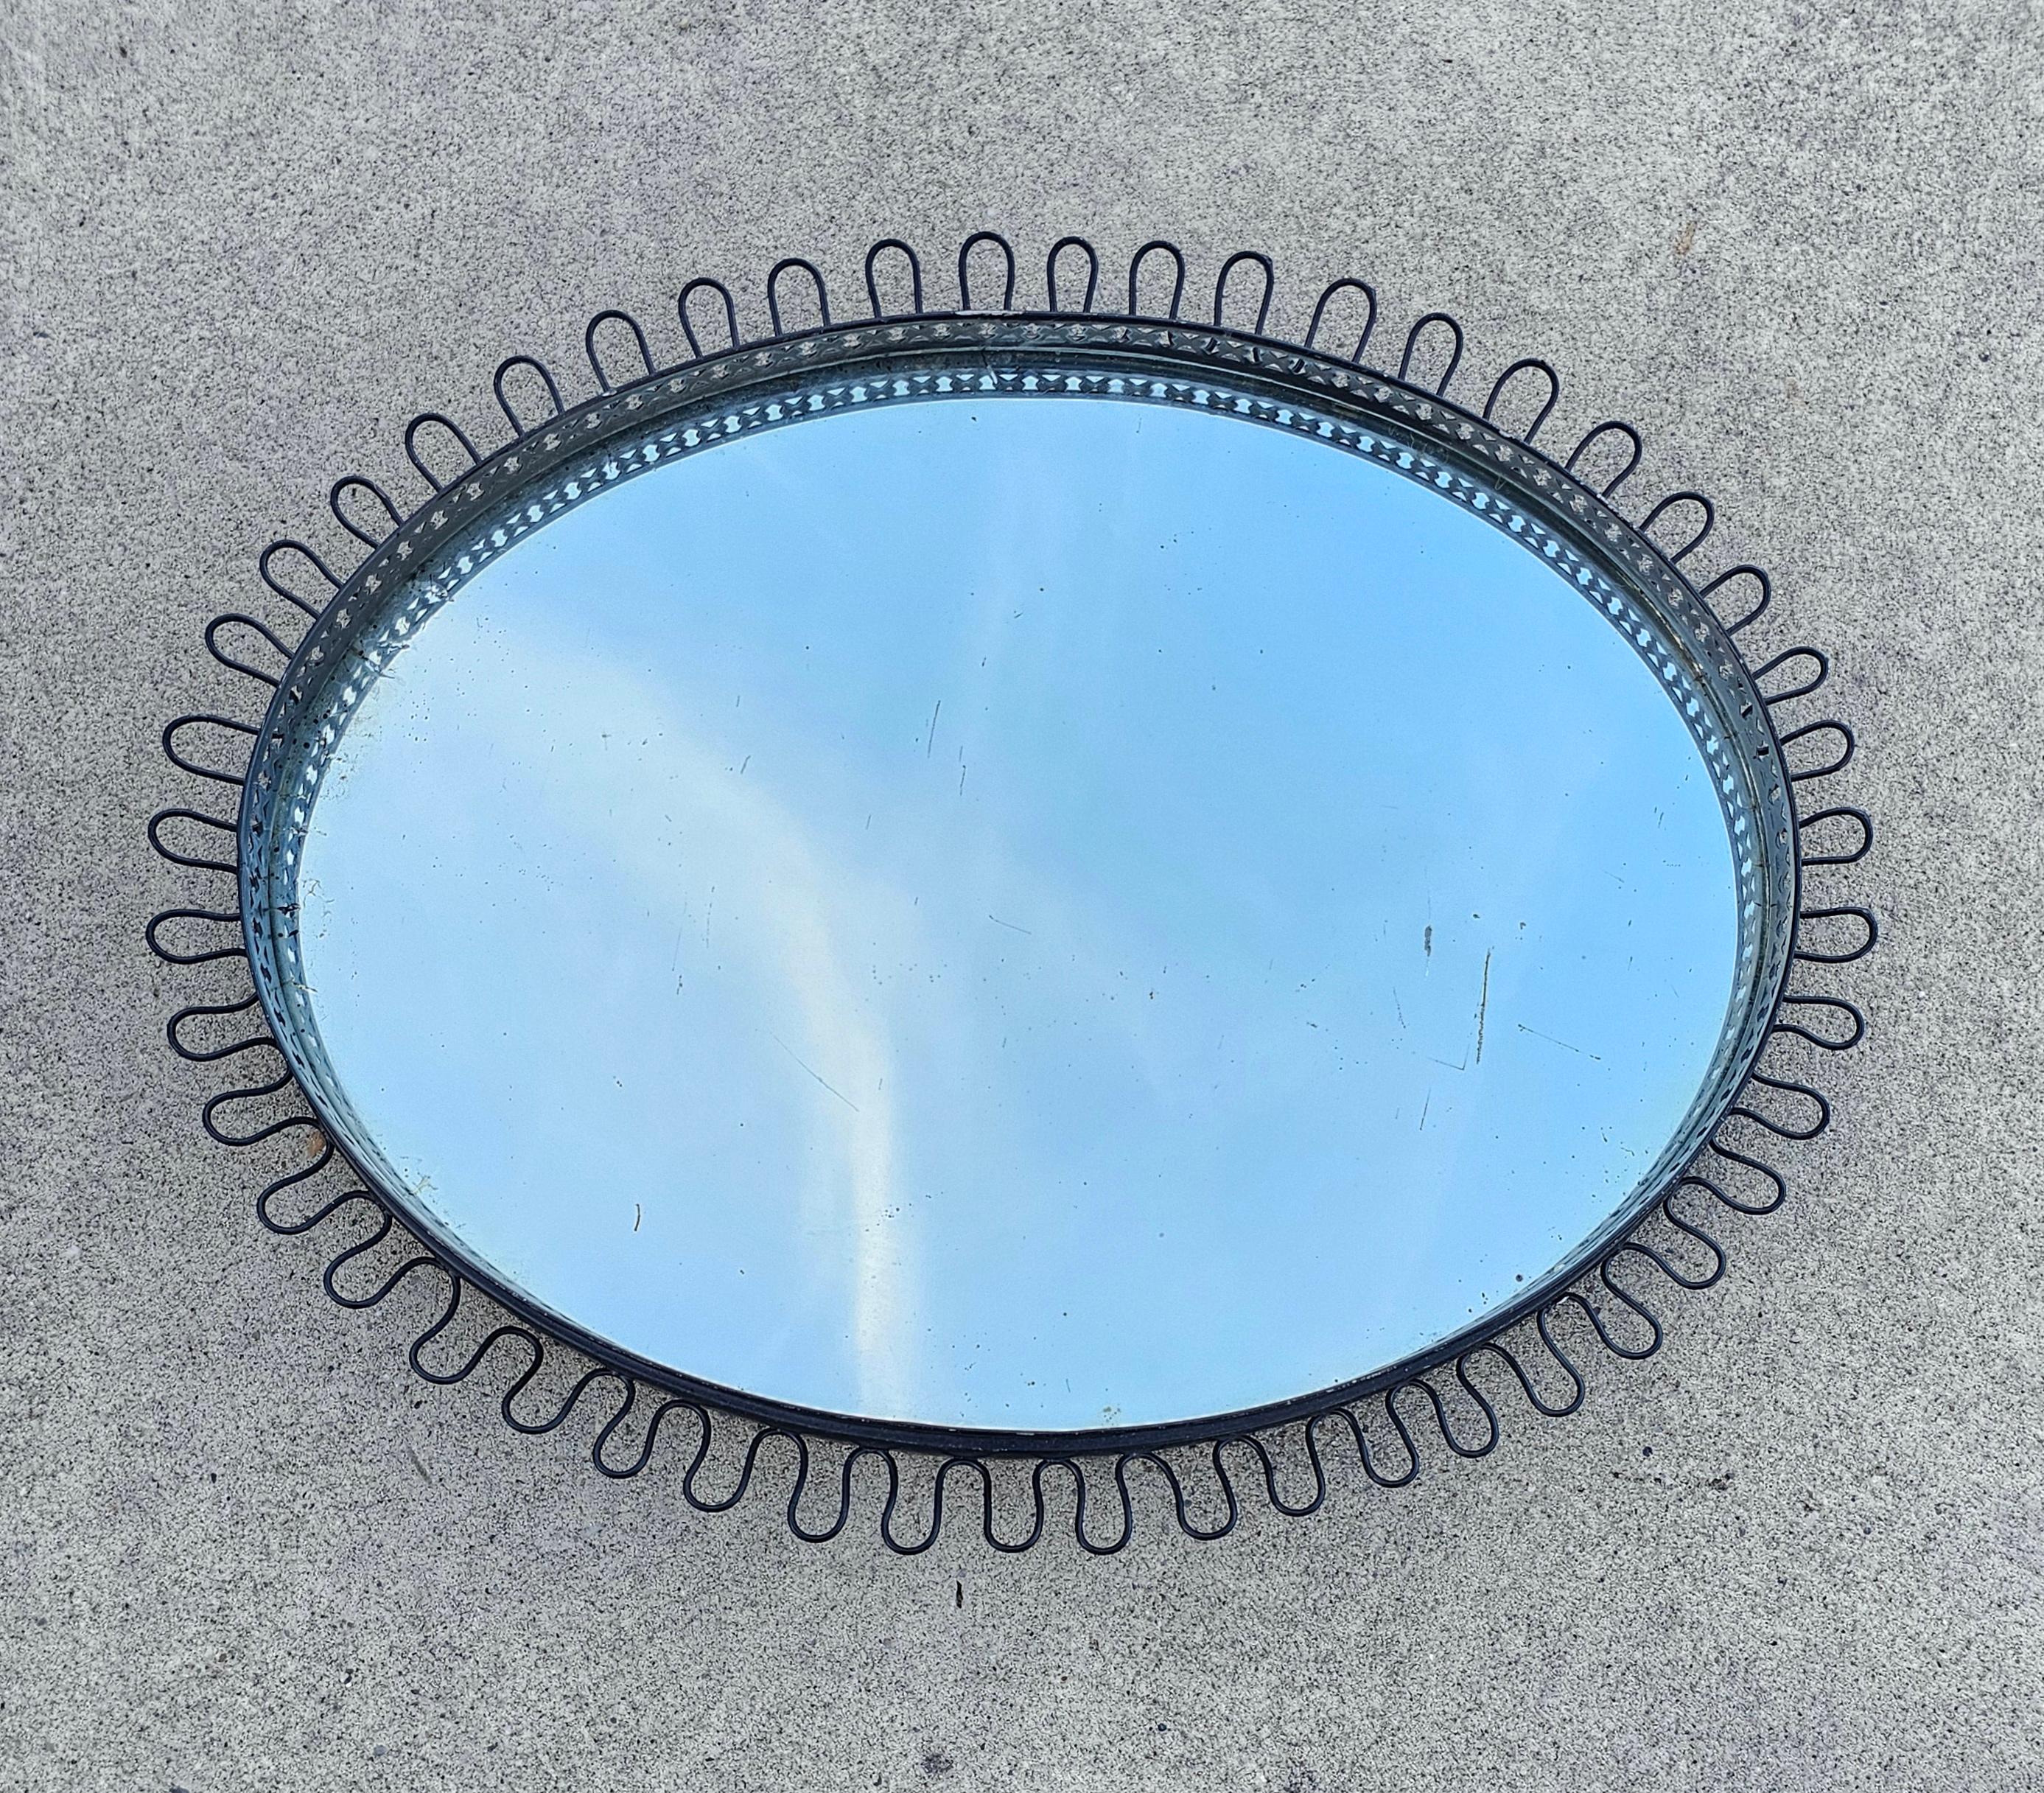 In this listing you will find beautiful and rare Mid Century Modern Oval Sunburst Mirror designed by Josef Frank. It comes with a black metal frame and the rope that allow you to mount it on the wall. Made in West Germany in 1960s.

Good vintage